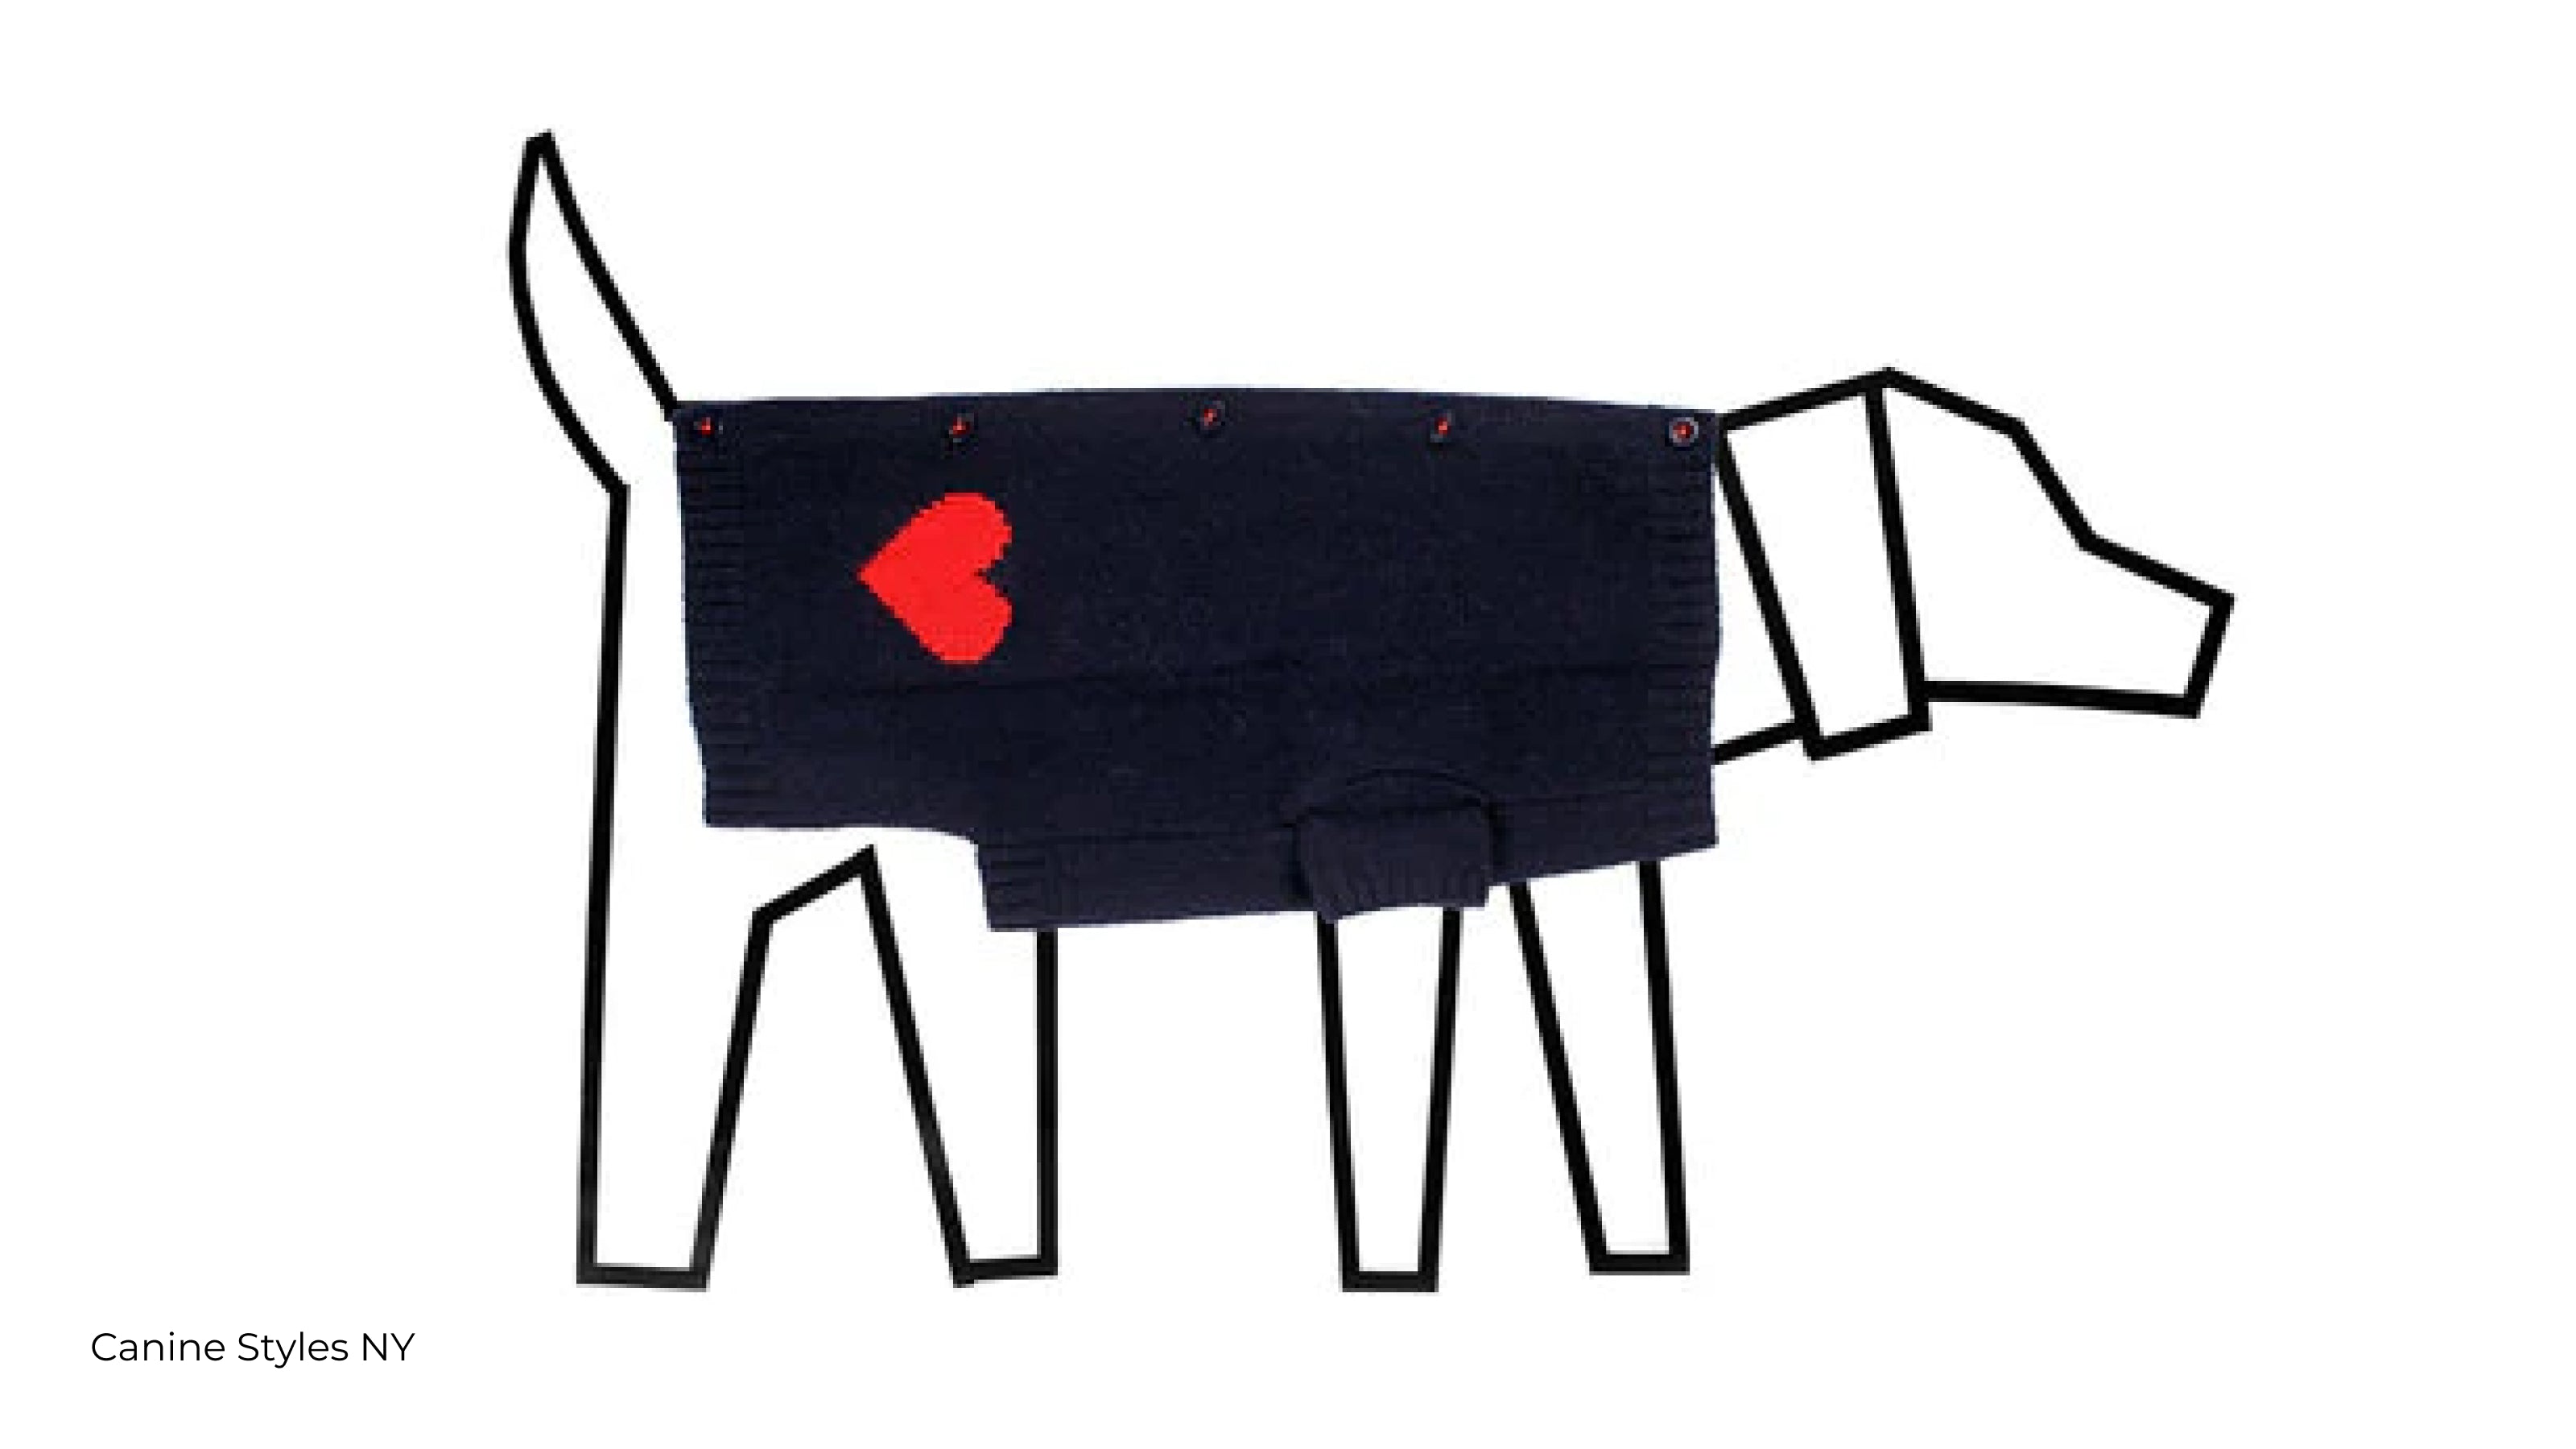 An outline illustration of a dog wearing a navy sweater with a red heart and button detailing